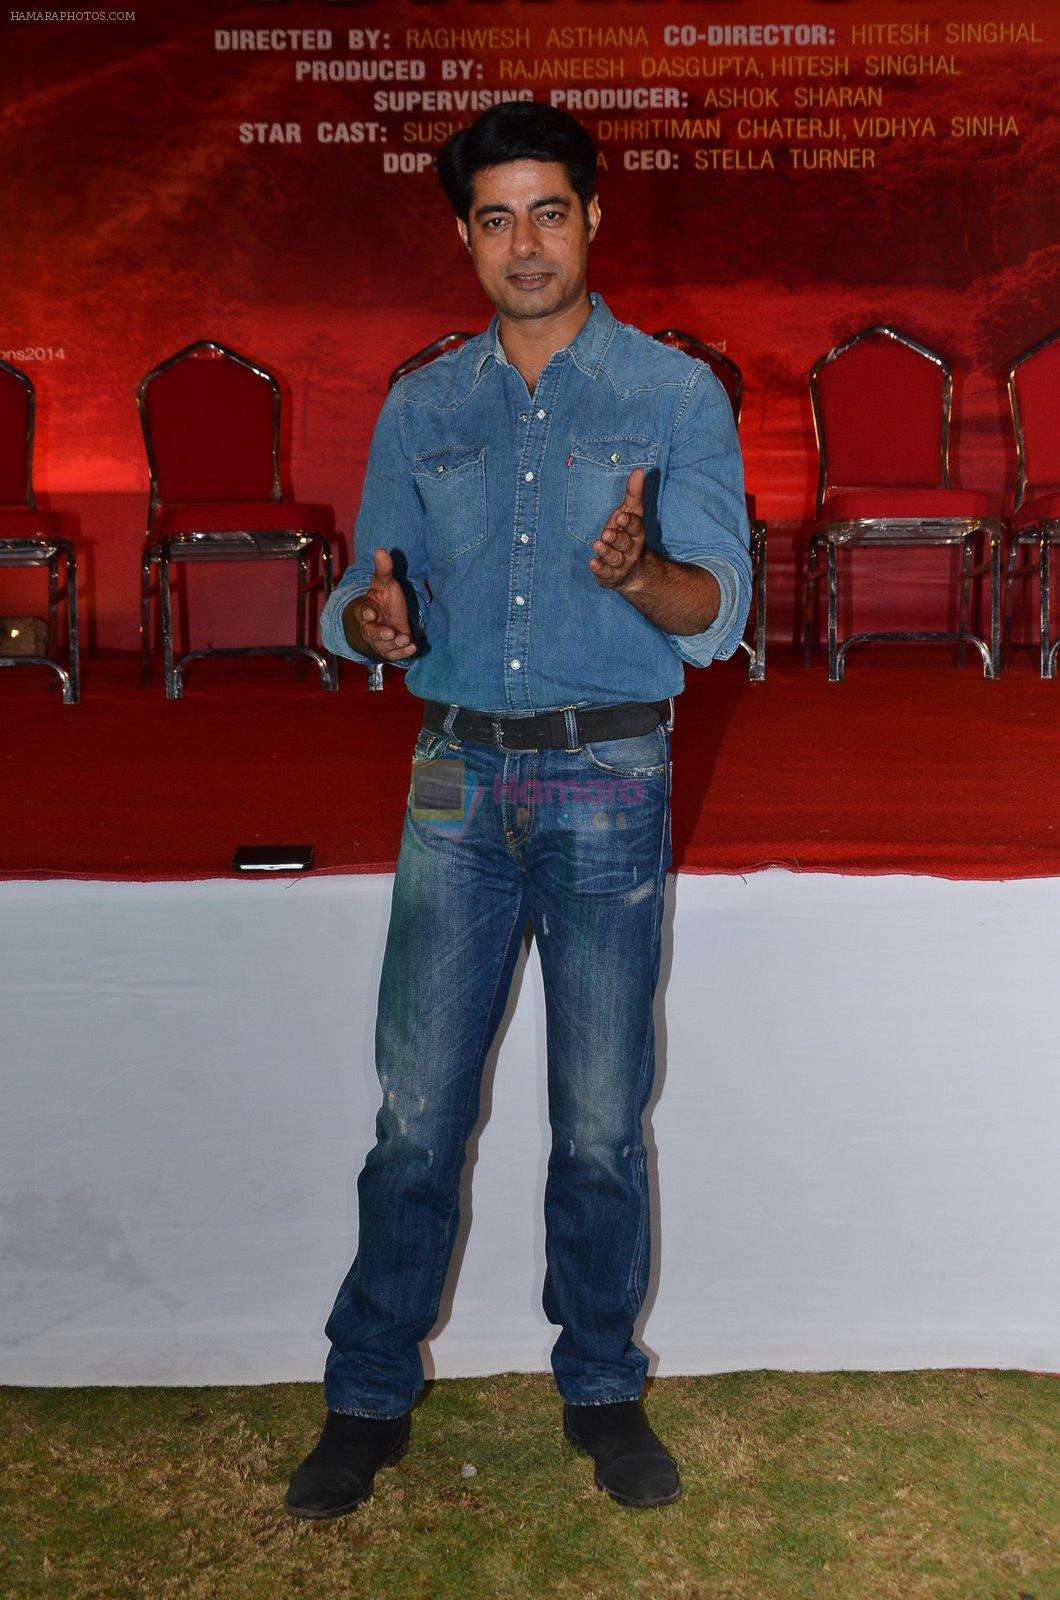 Sushant Singh at The Red corridor film launch in Country Club, Mumbai on 18th Jan 2015